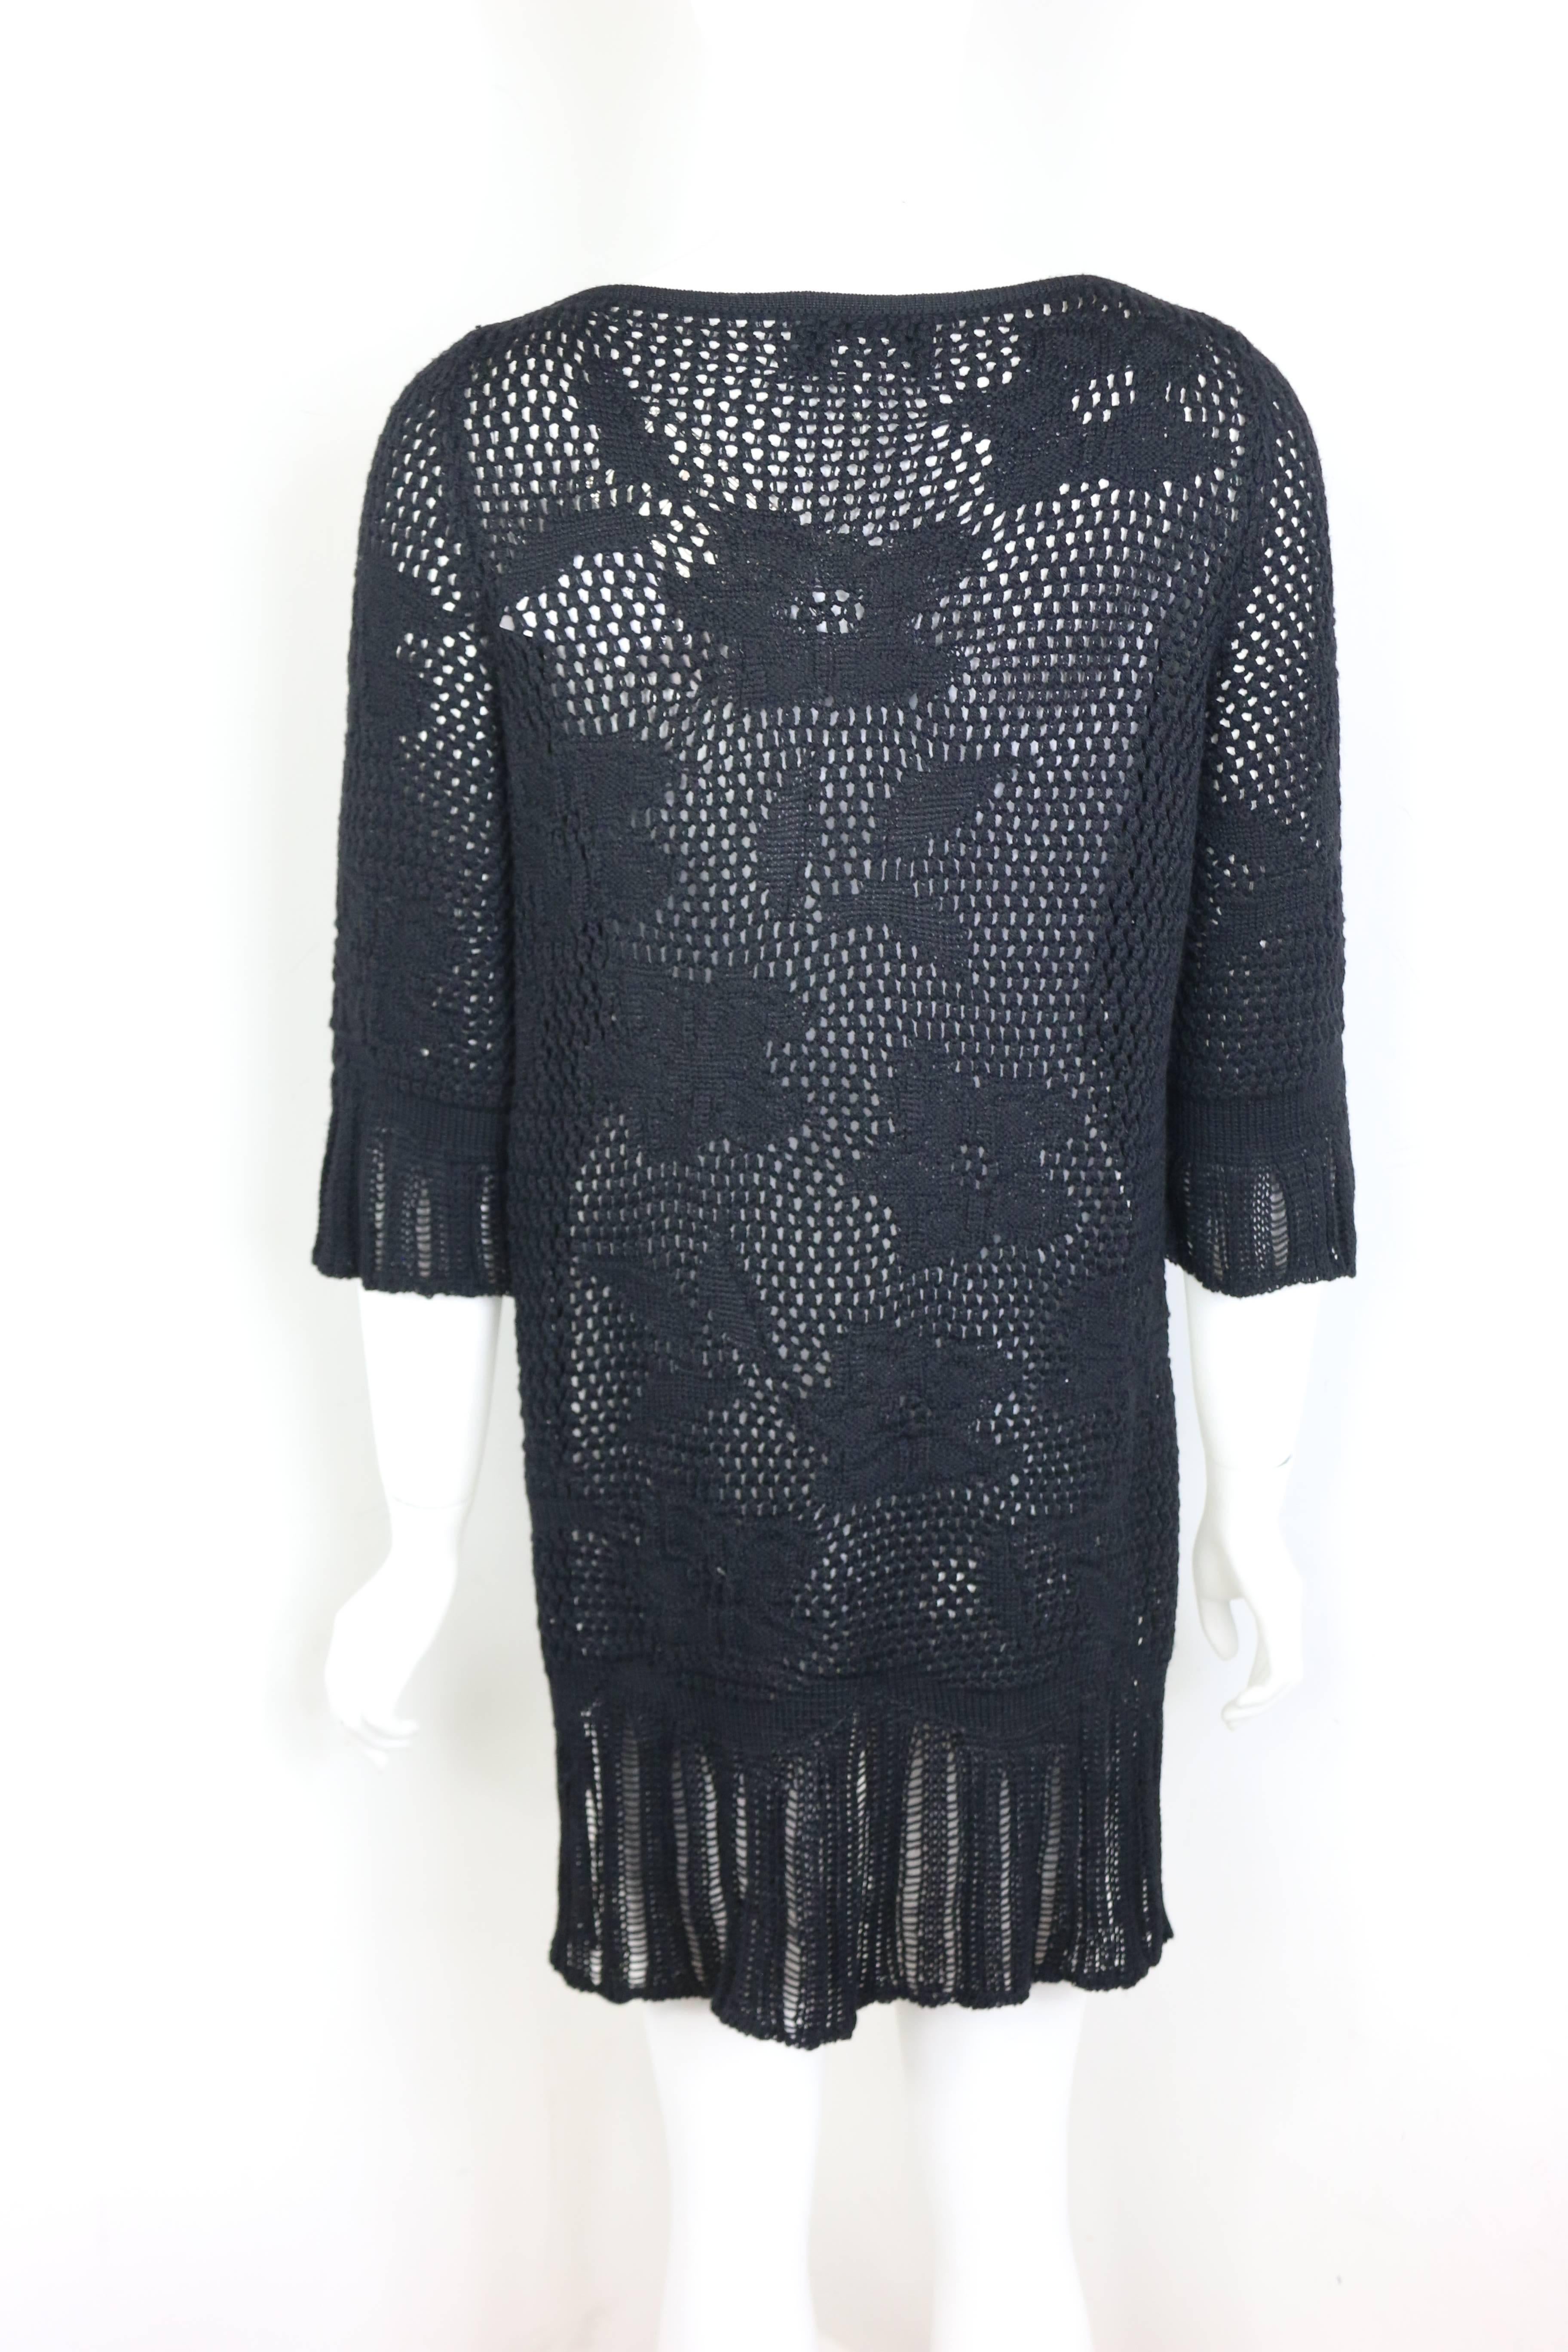 Gianni Versace Black Knitted Wool Side Silt Sweater  In Excellent Condition For Sale In Sheung Wan, HK